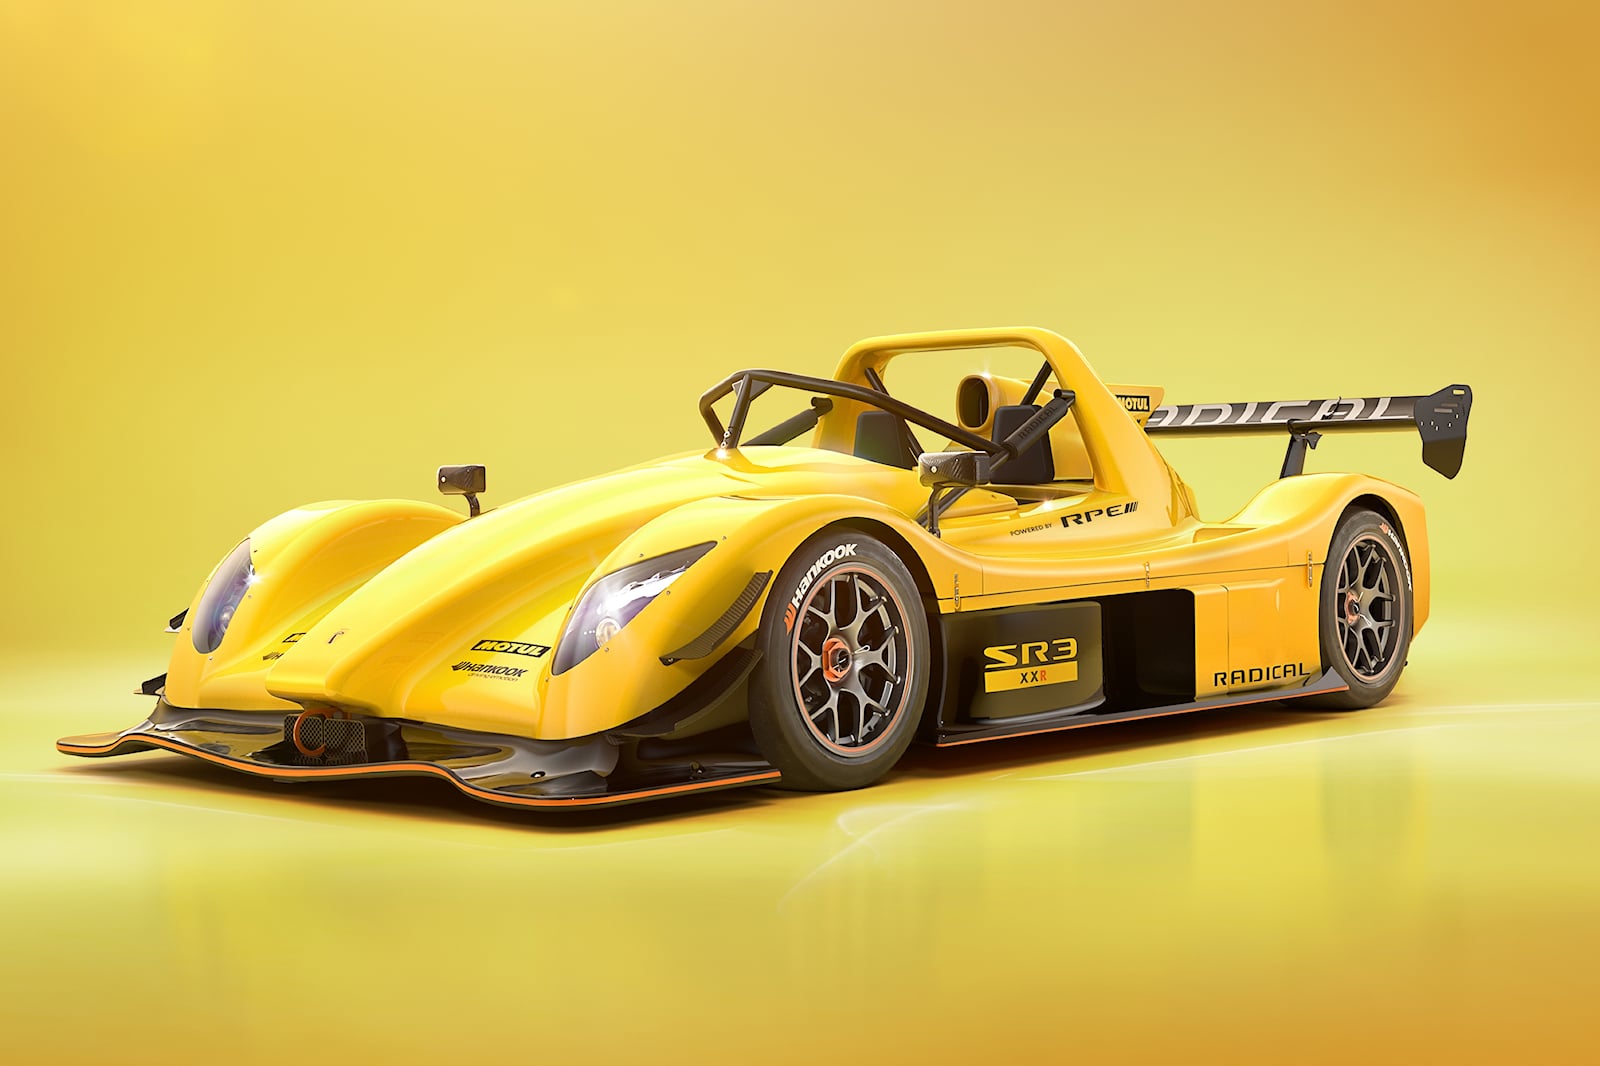 Radical SR3 XXR Debuts With 232 HP And E85 Compatibility